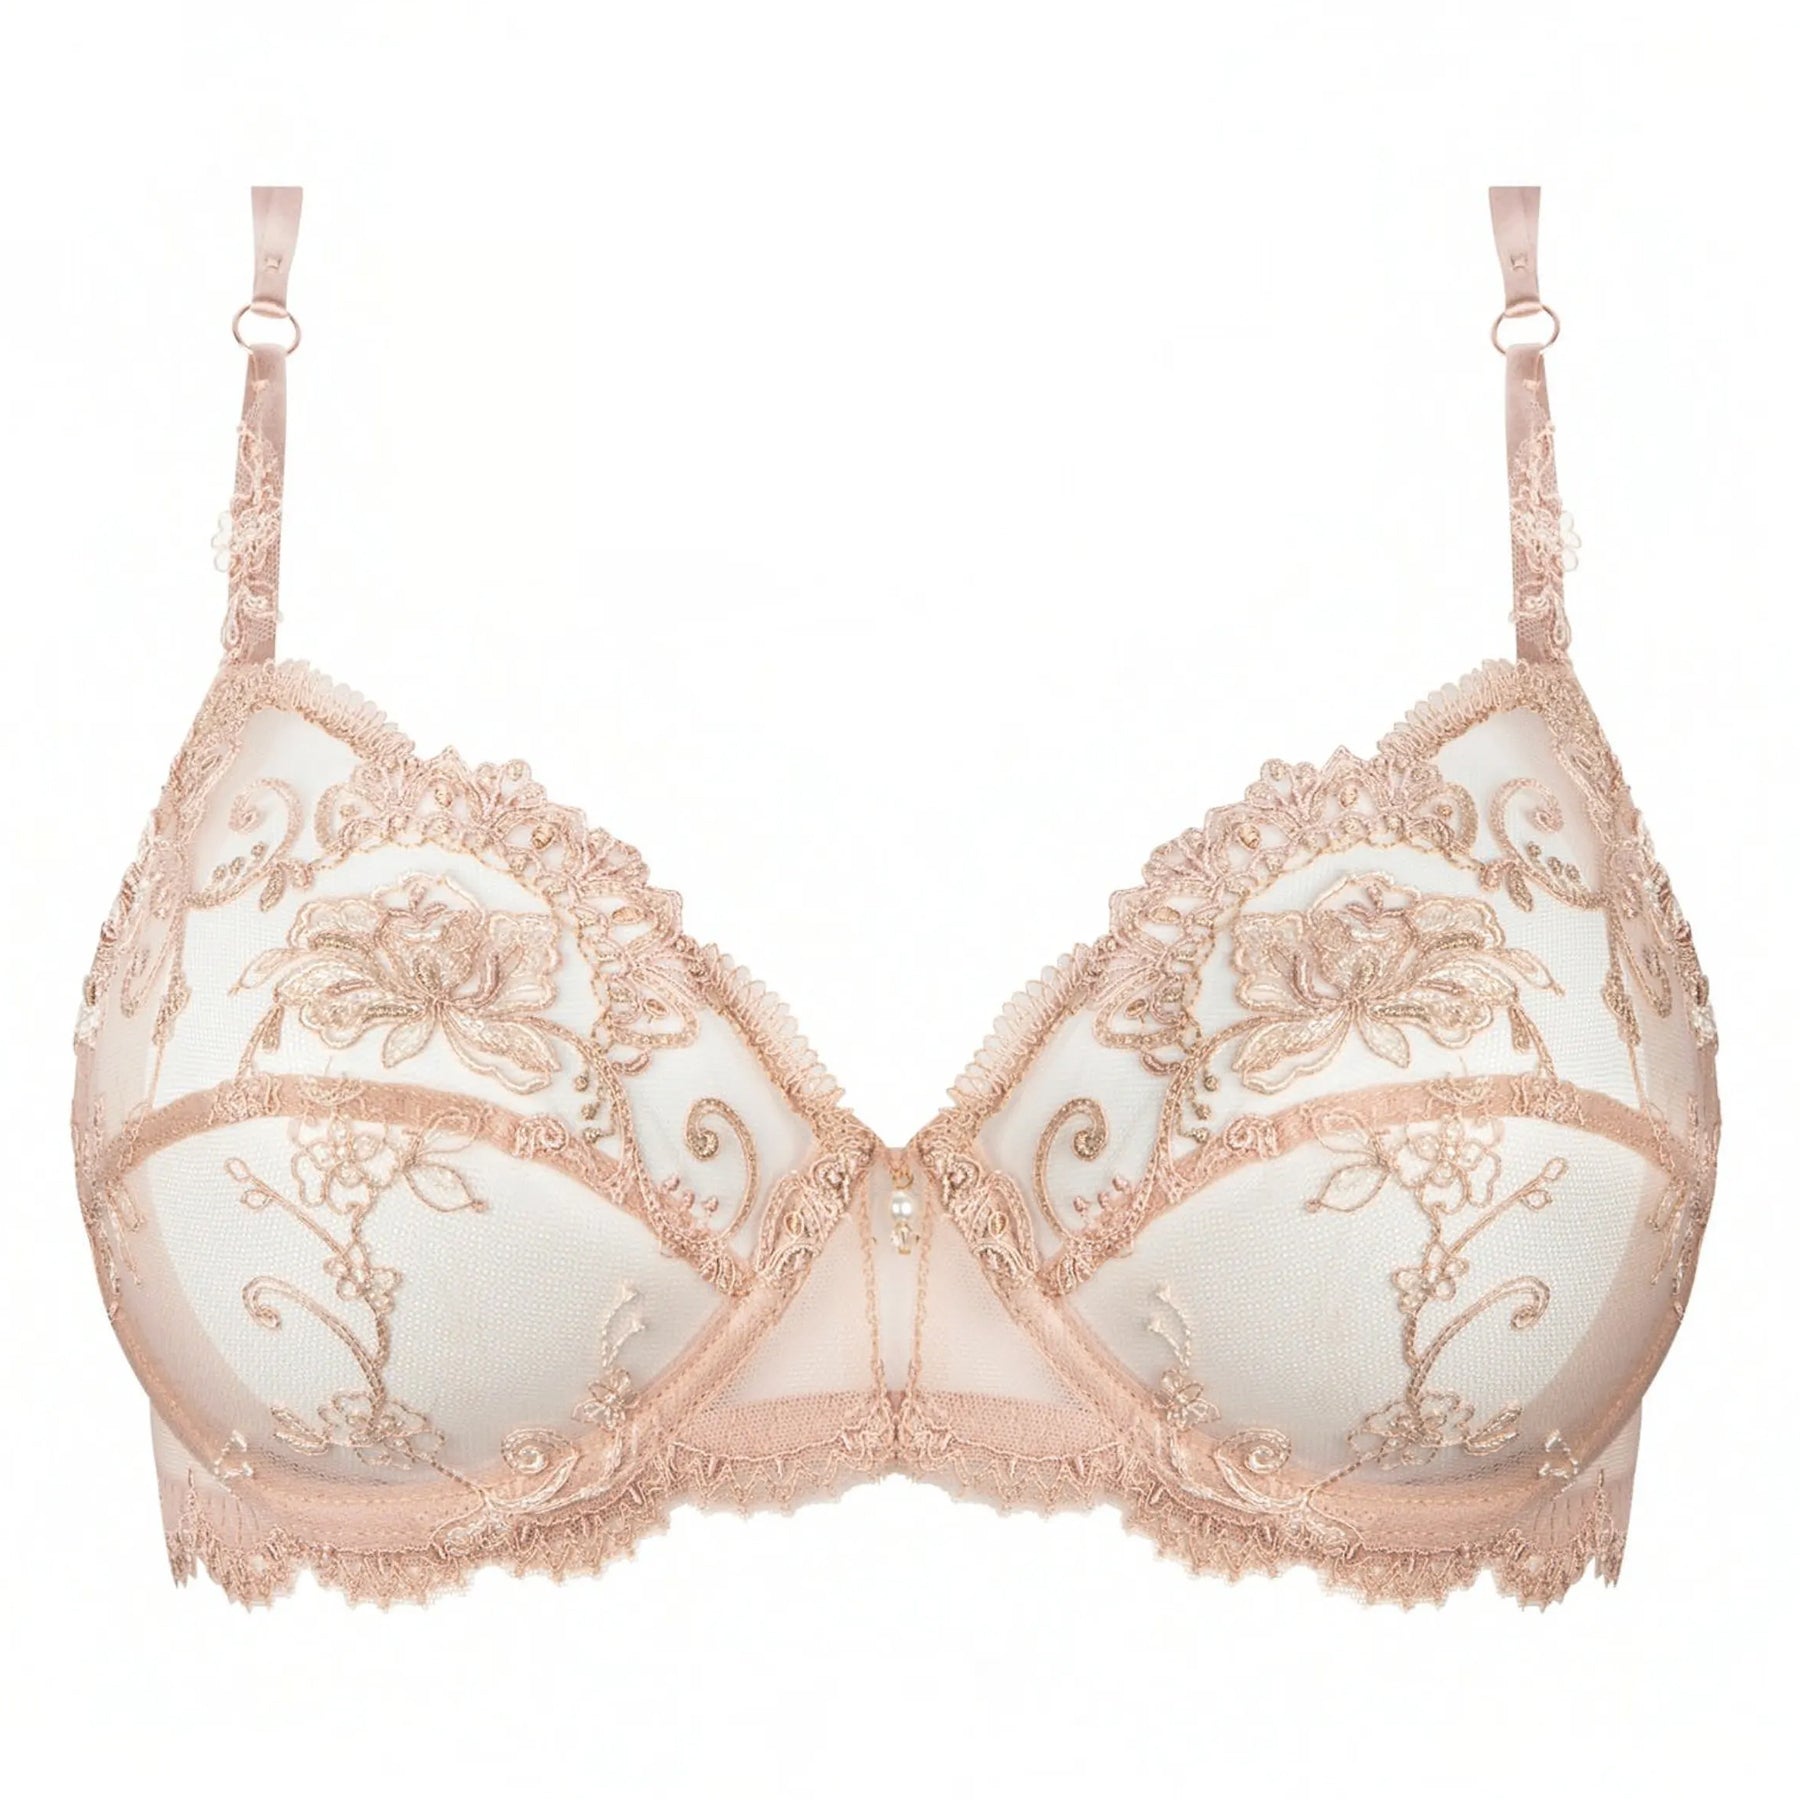 Lise Charmel Déesse en Glam 3 Part Full Cup Bra in Or Glamour - Busted Bra  Shop